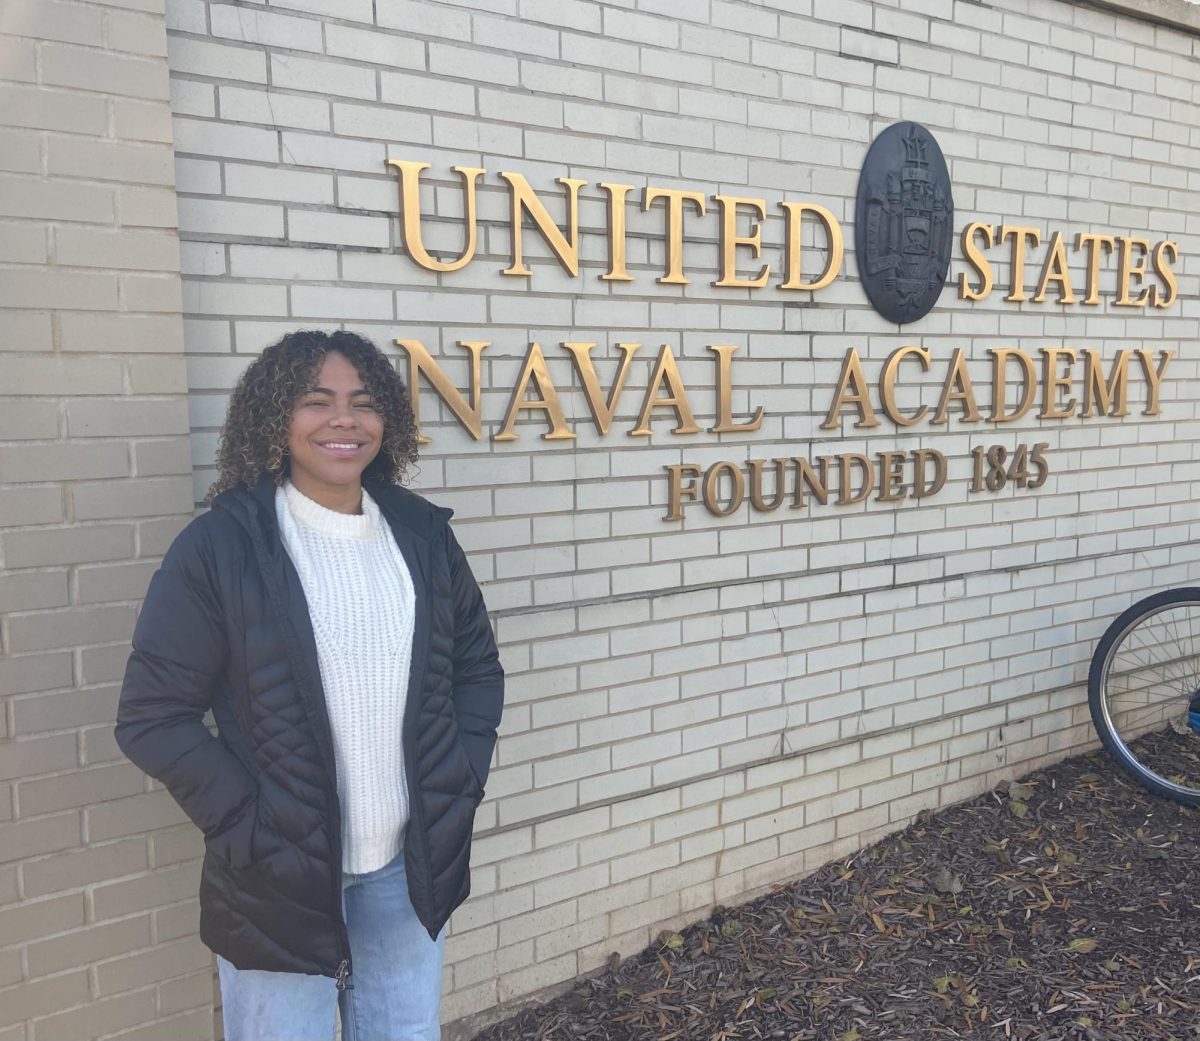 During+the+winter%2C+Milan+visited+the+Naval+Academy+in+Annapolis%2C+MD.+